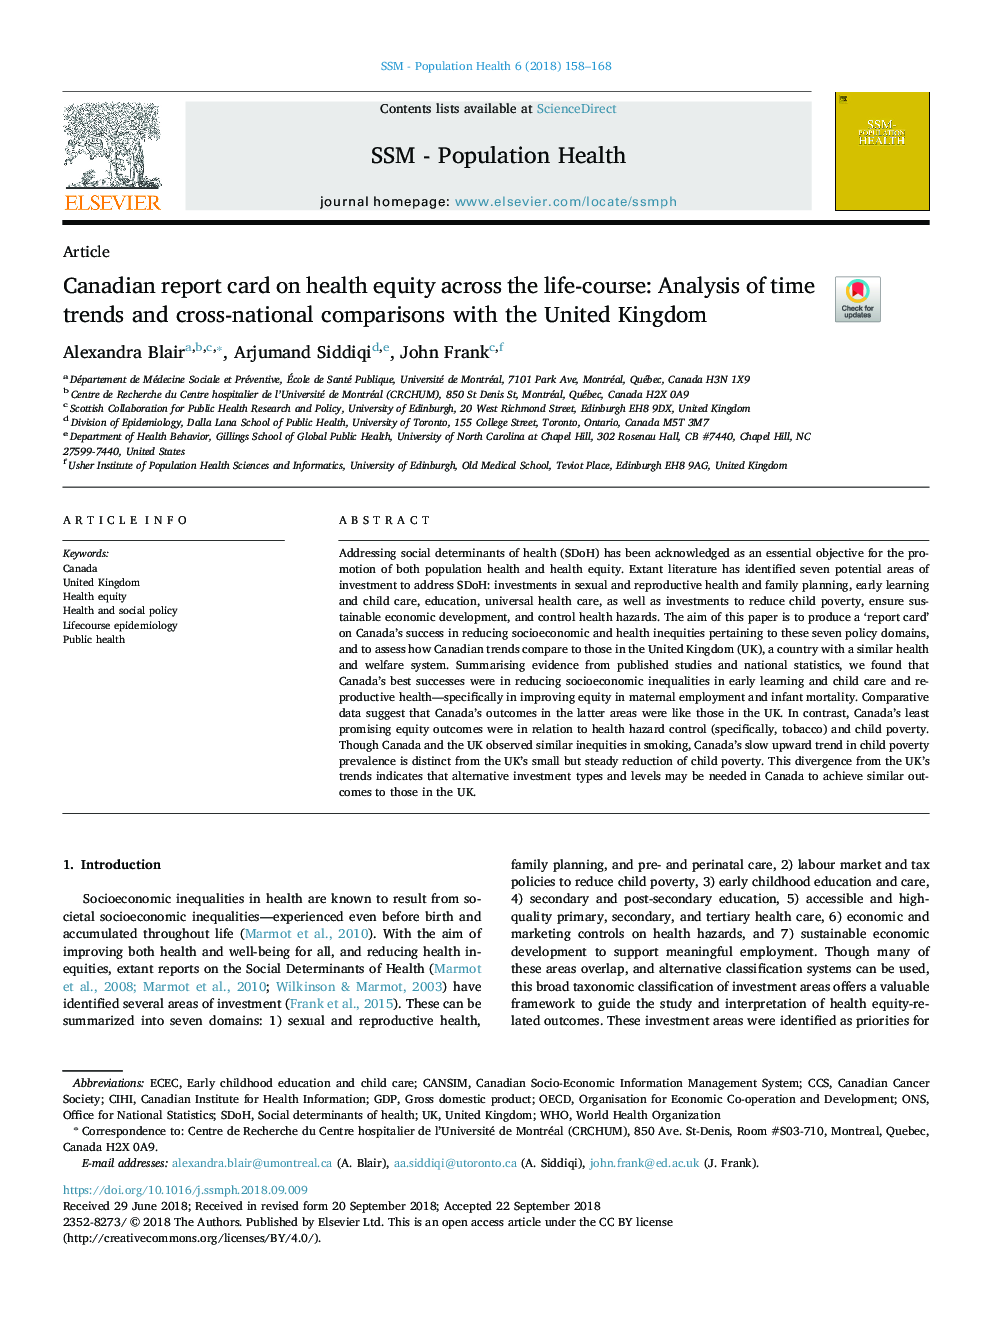 Canadian report card on health equity across the life-course: Analysis of time trends and cross-national comparisons with the United Kingdom